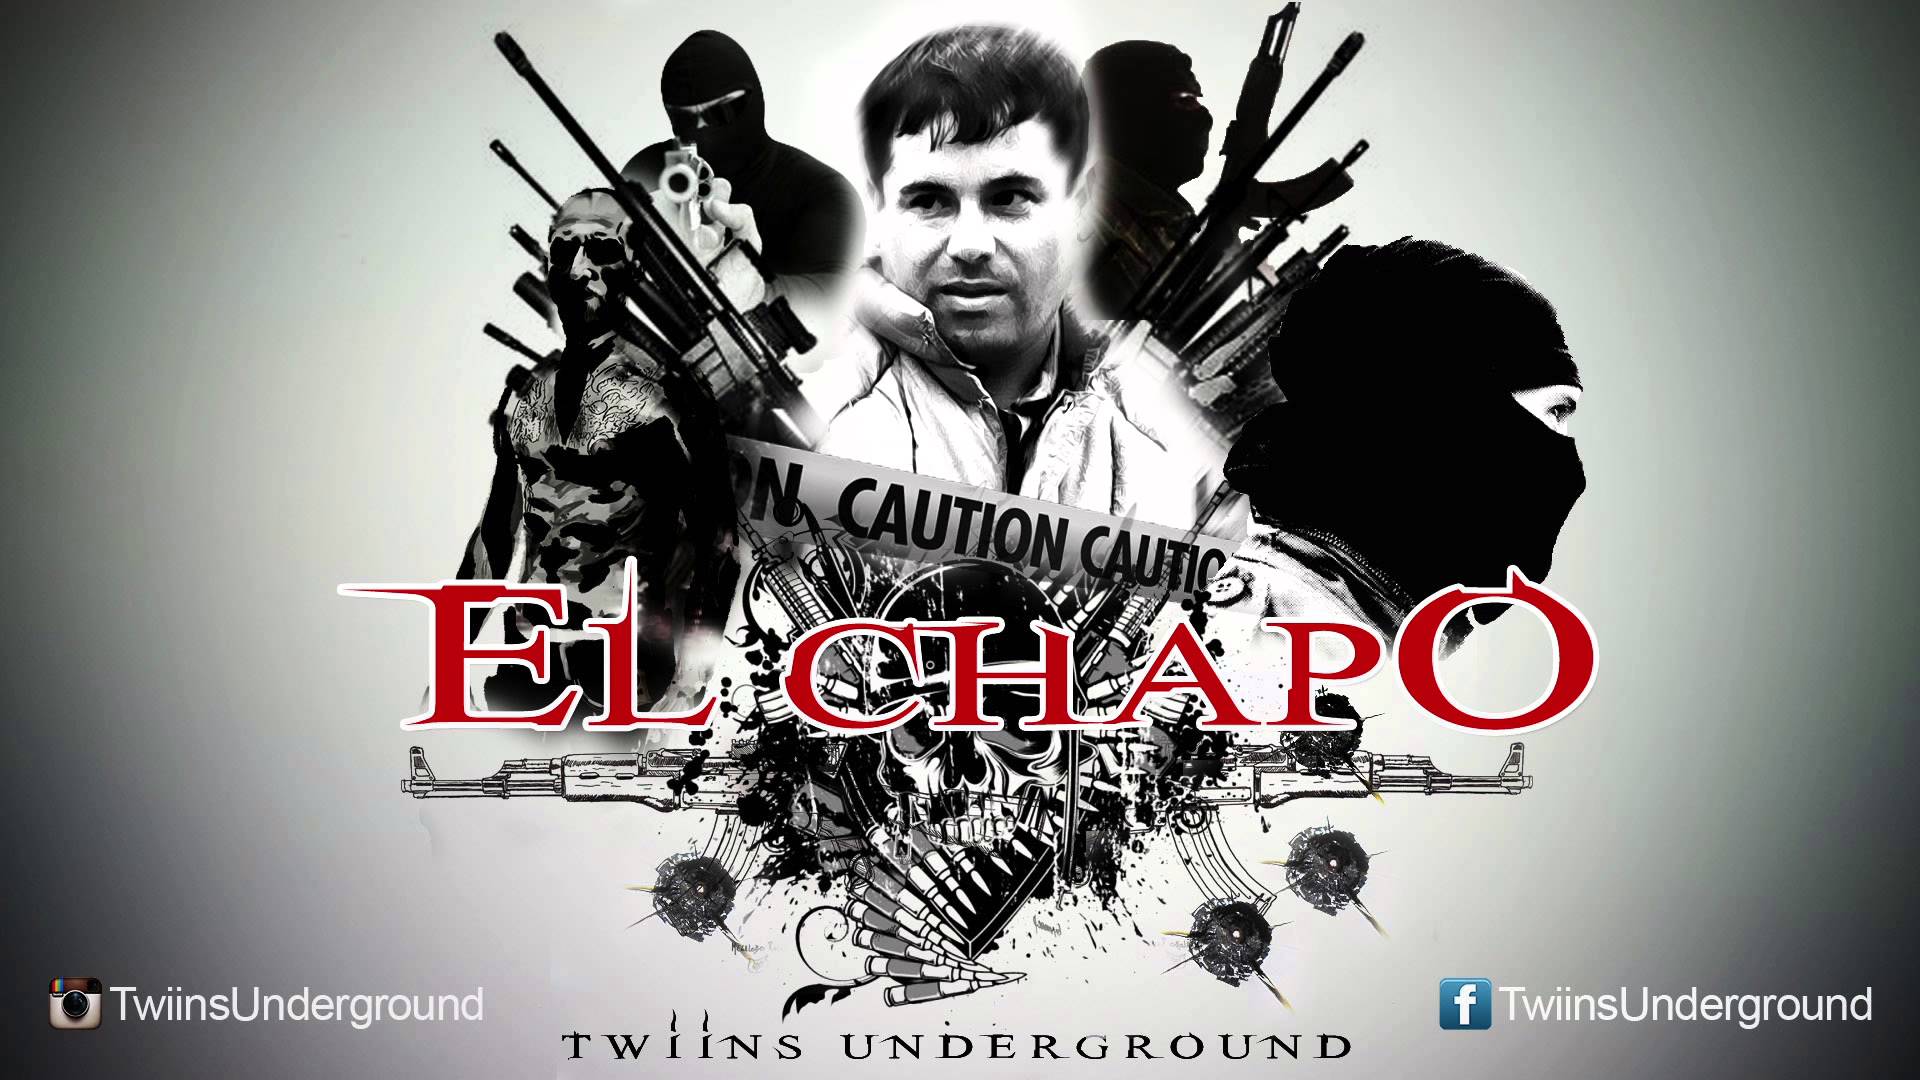 Download El Chapo wallpapers for mobile phone free El Chapo HD pictures